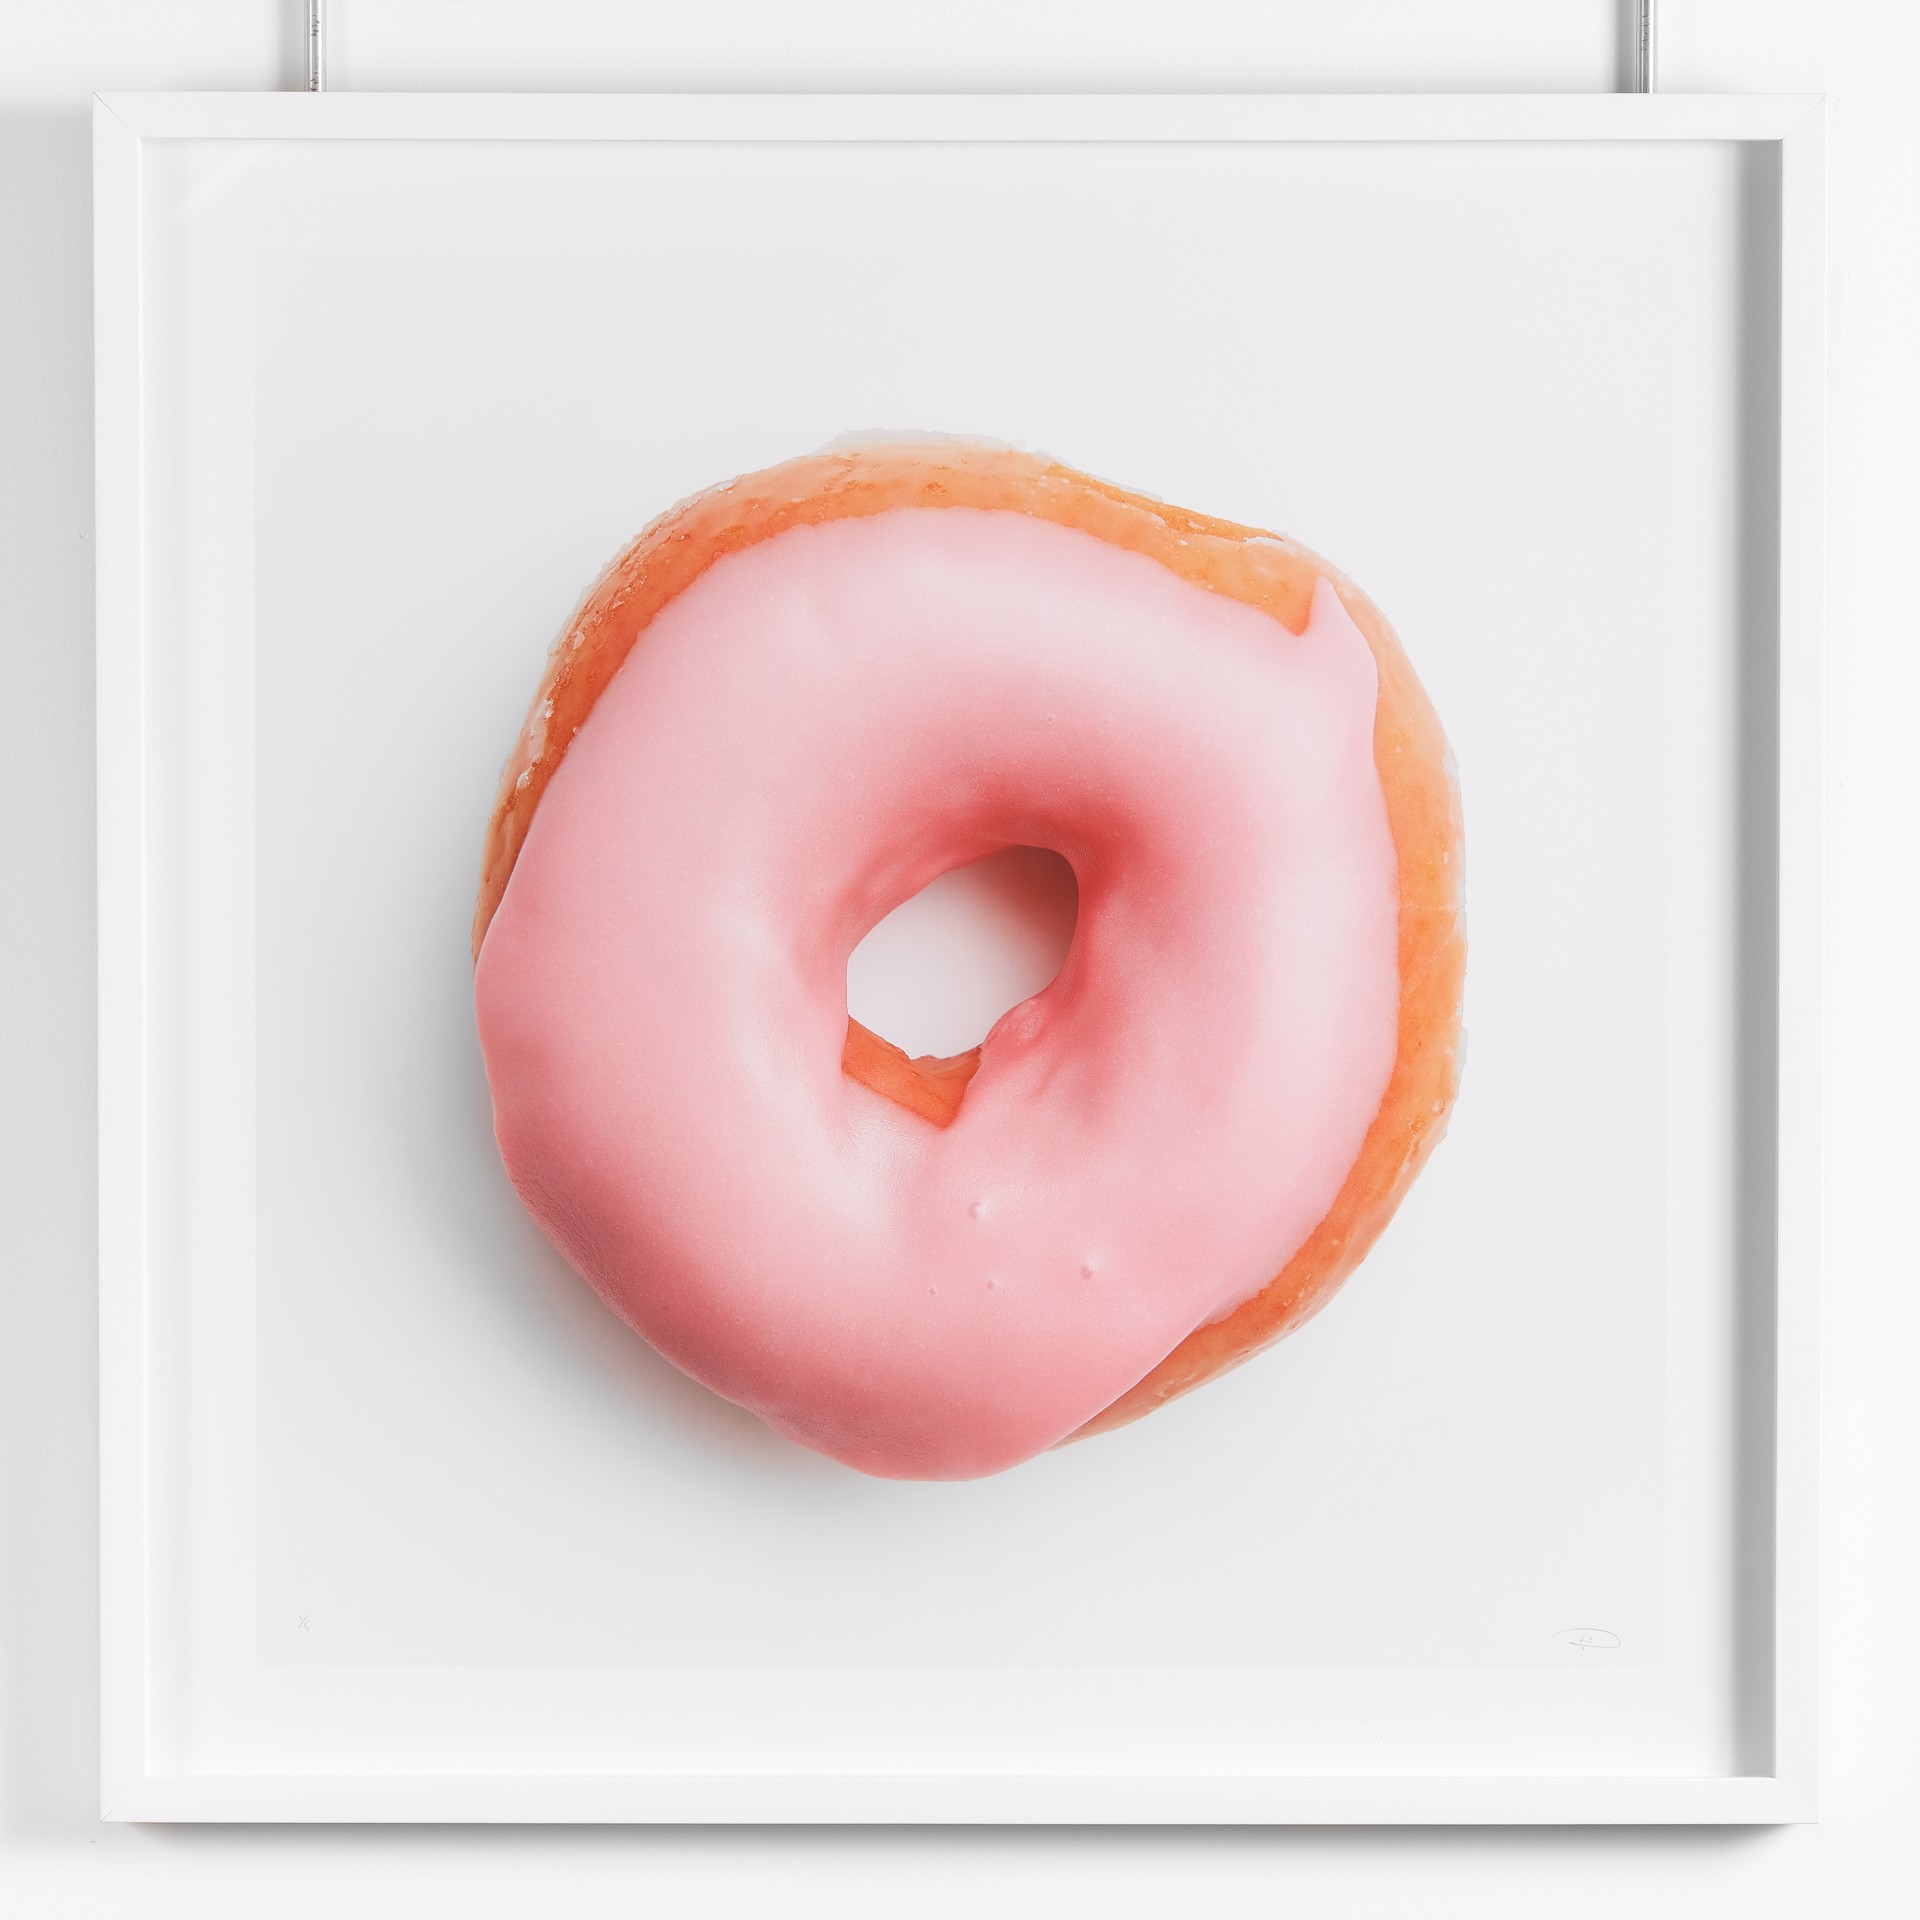 Donut (Strawberry) by Peter Andrew Lusztyk / Refined Sugar